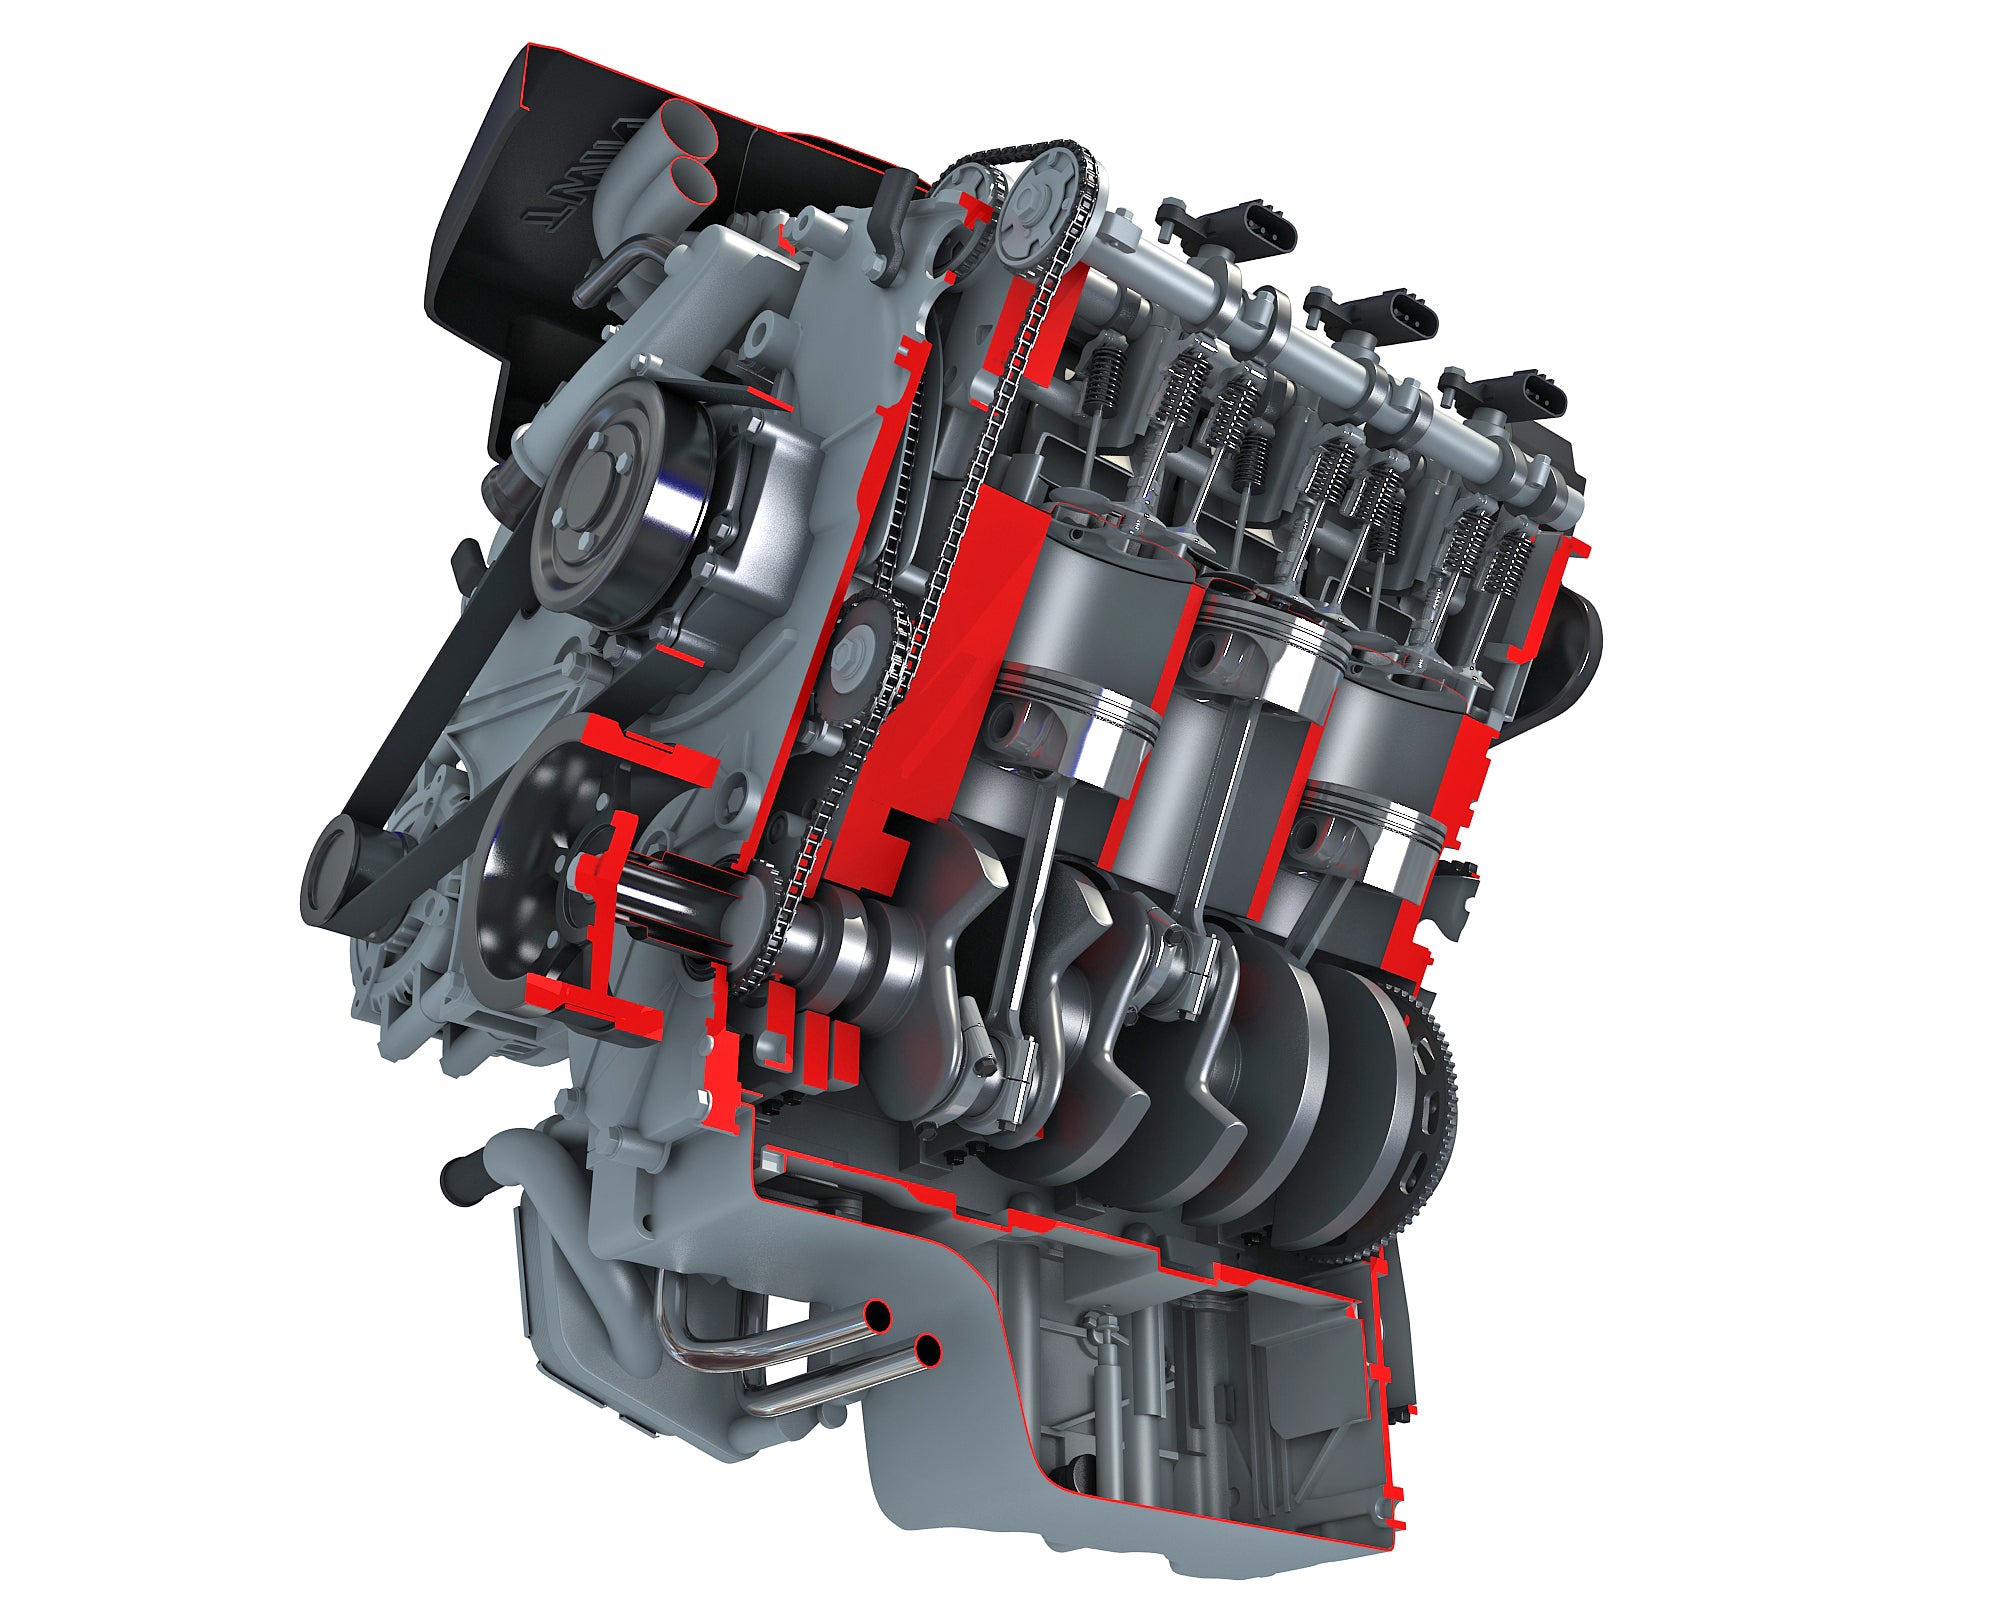 Sectioned Engine 3D Models